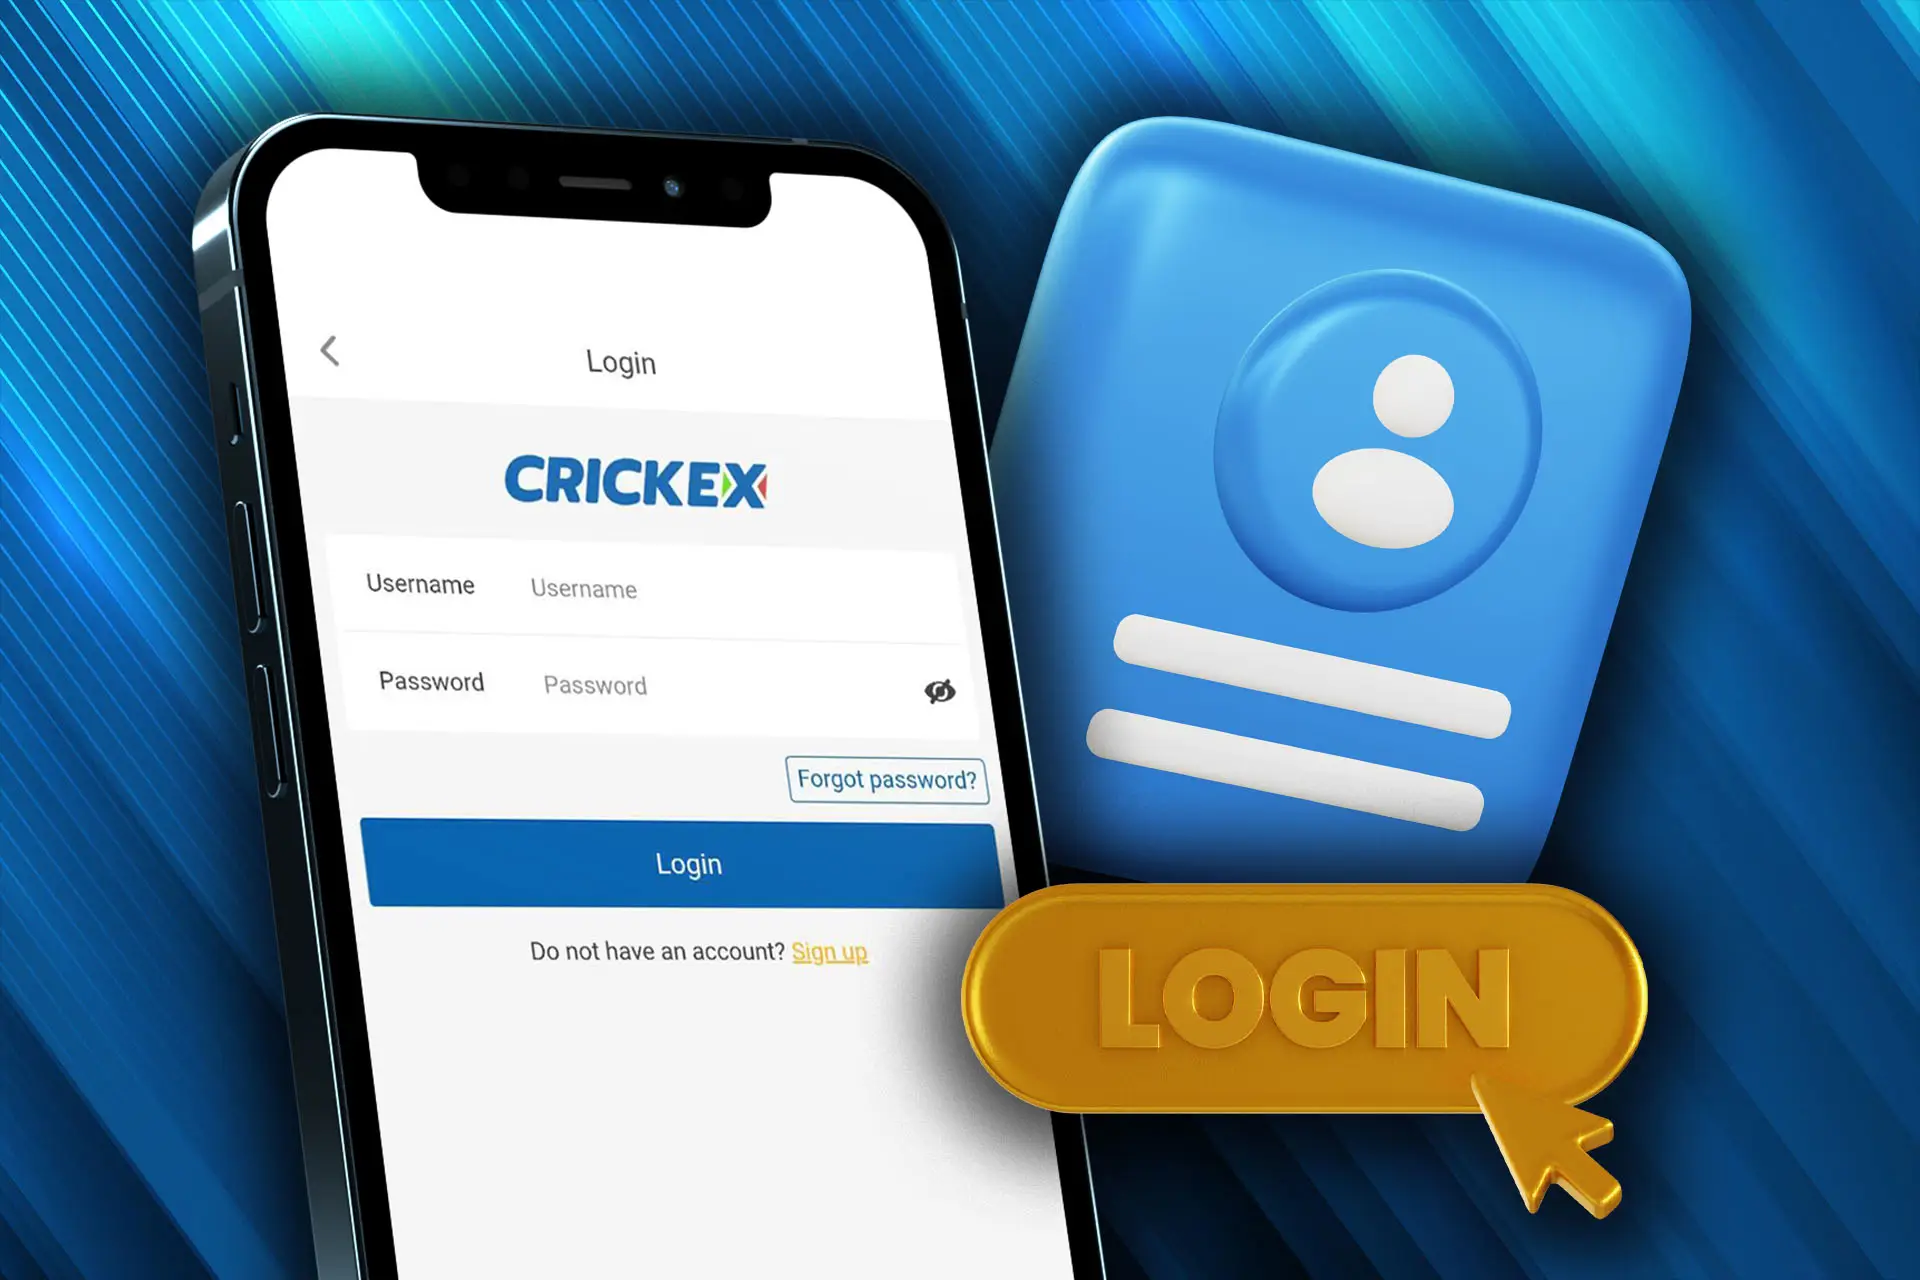 Enter you login and password into necessary fields and log in to Crickex.